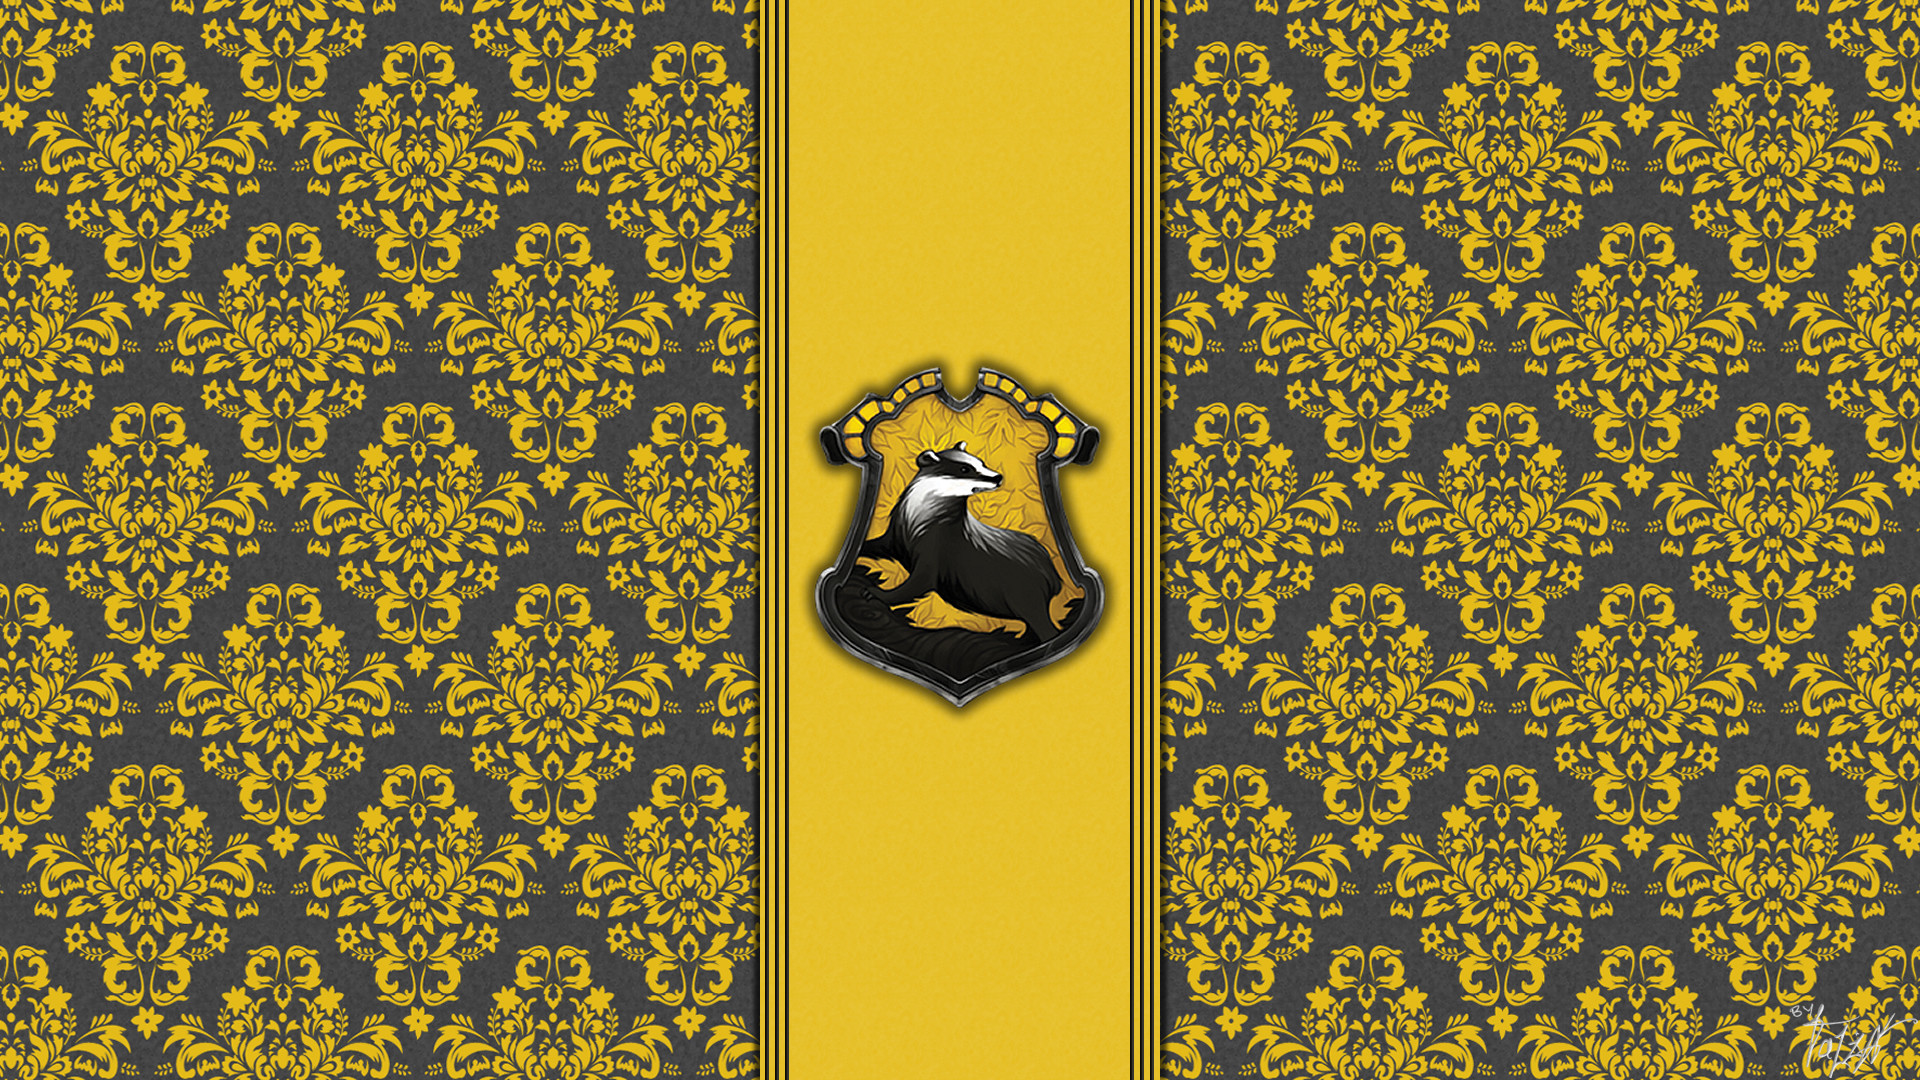 30 Hufflepuff Backgrounds for your iphone  Prada  Pearls